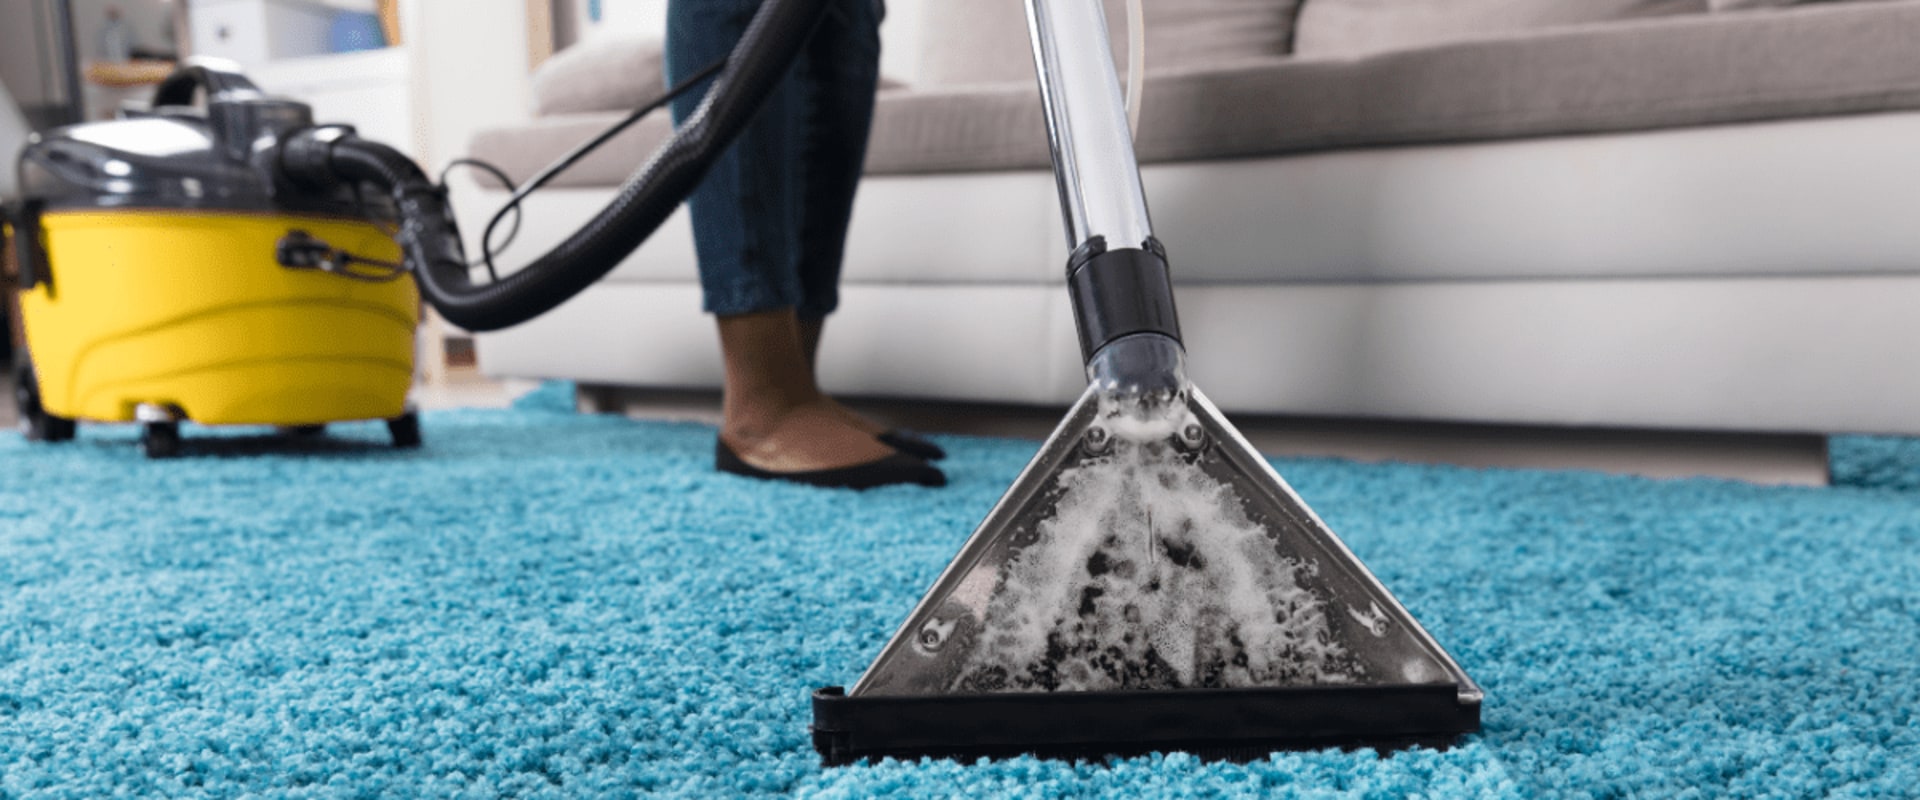 What is the difference between a deep and a standard cleaning?